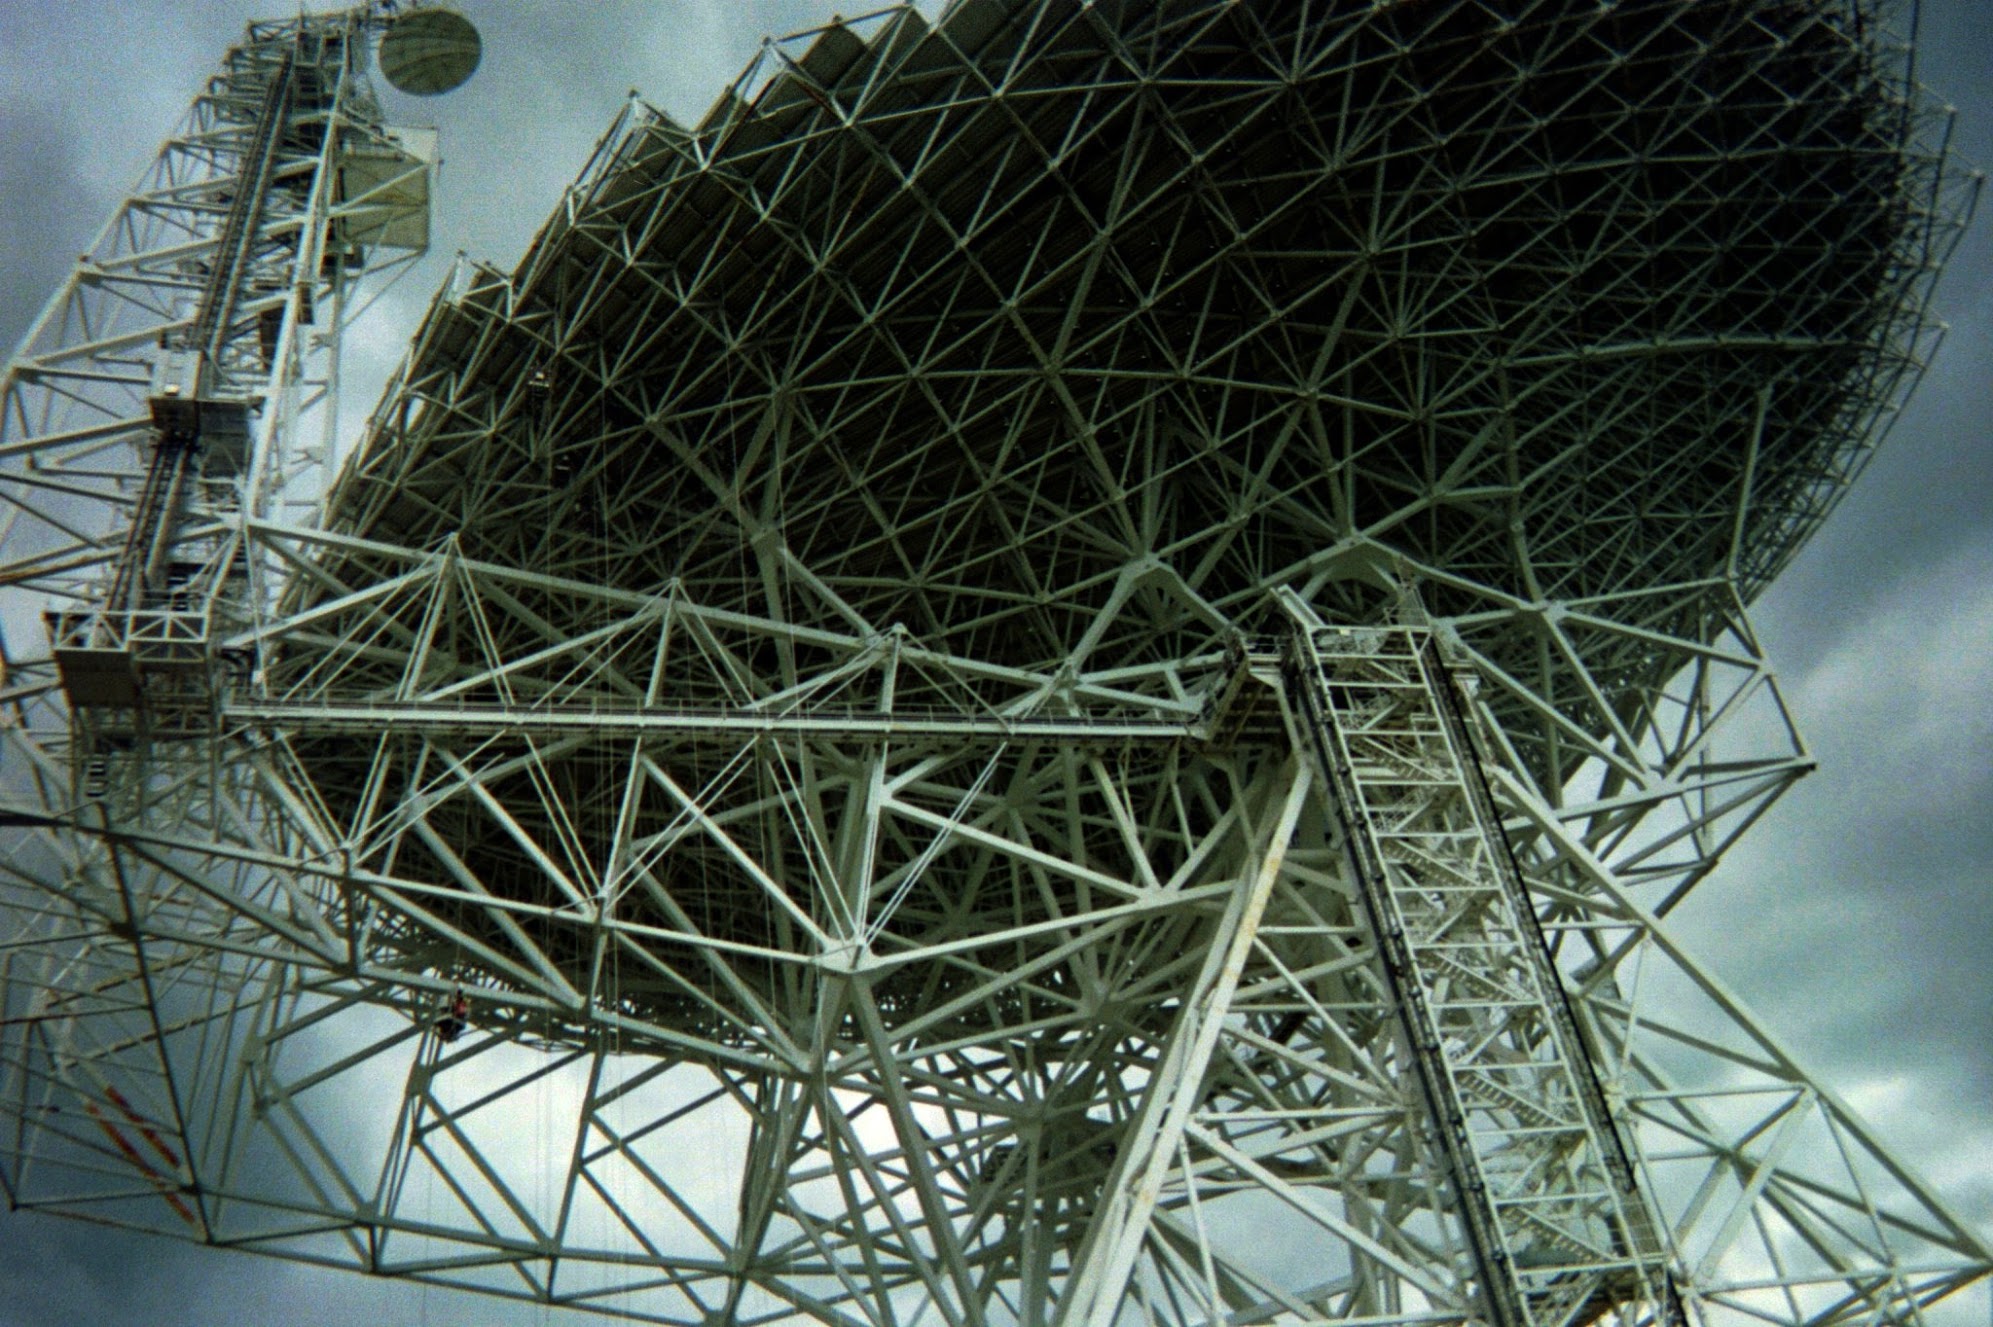 A photo of the Green Bank Telescope (GBT) taken from the ground